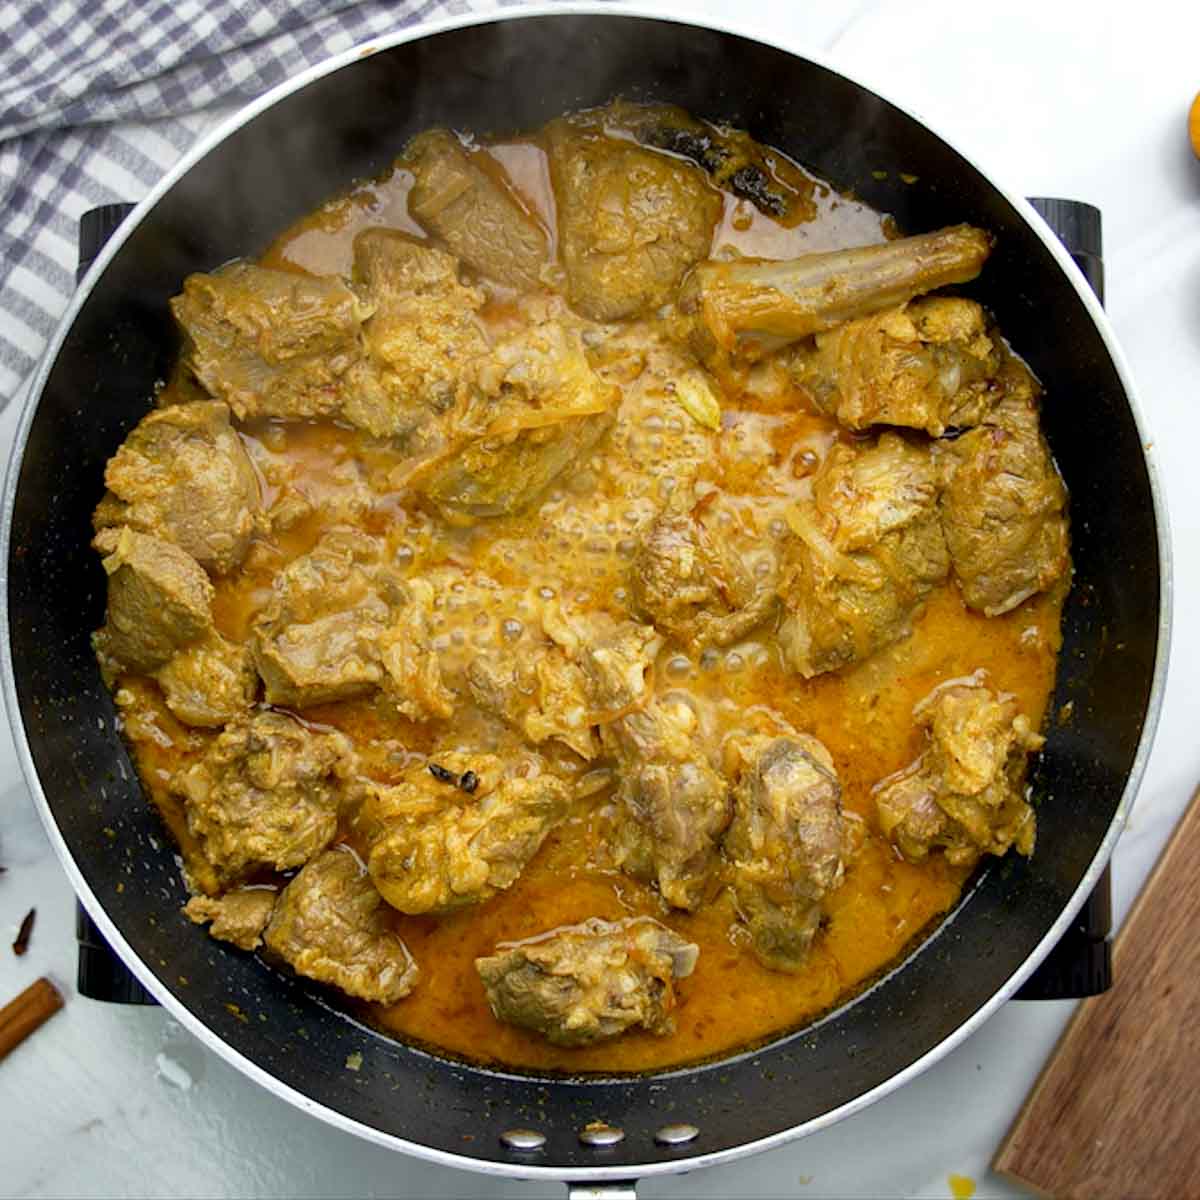 Cooking marinated mutton pieces in a pan with spices for the biryani.